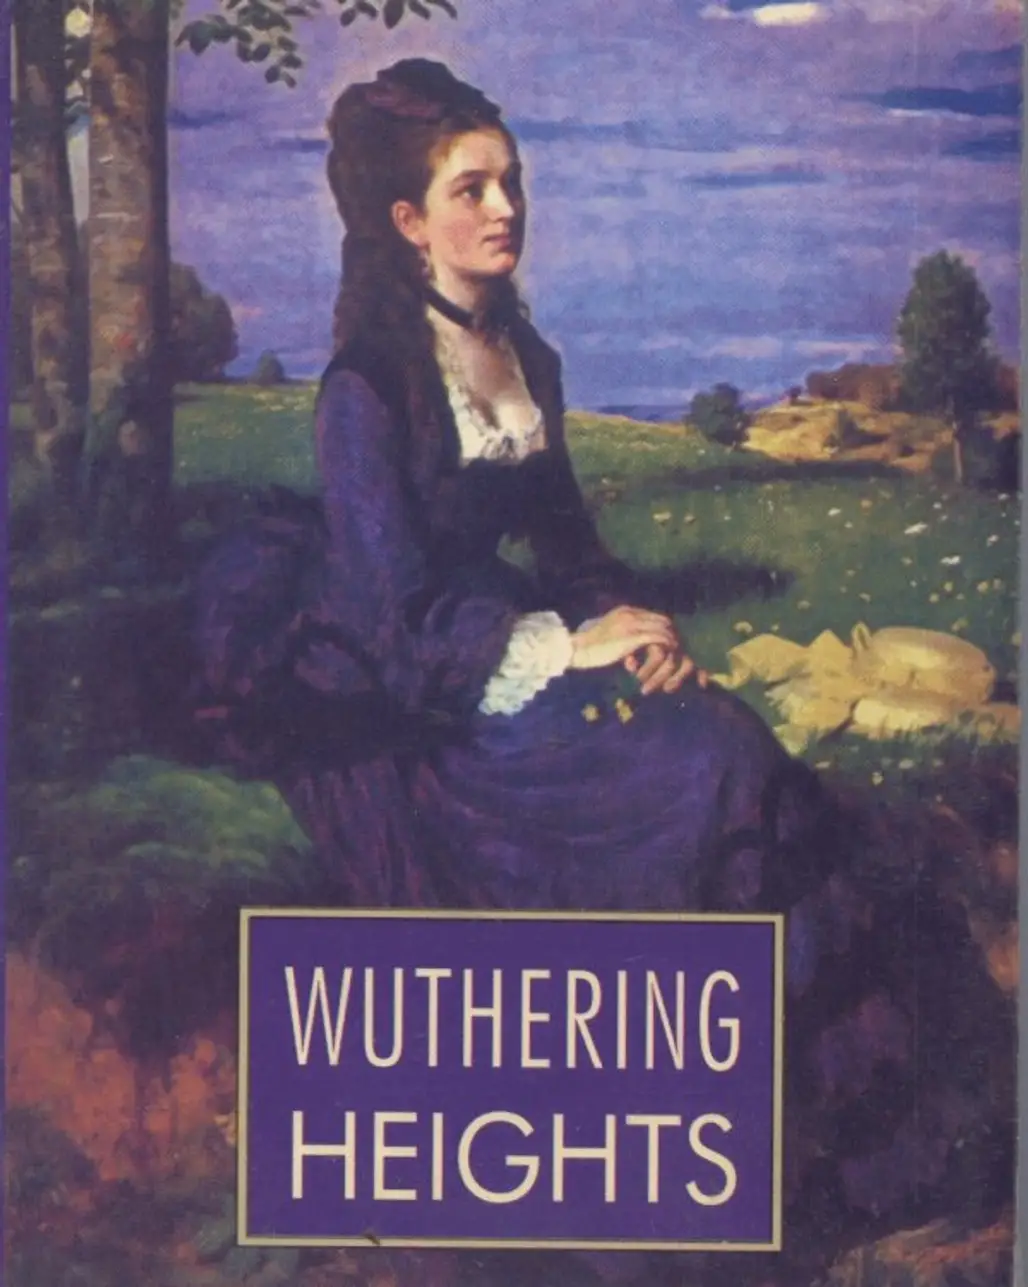 Wuthering Heights - Heathcliff